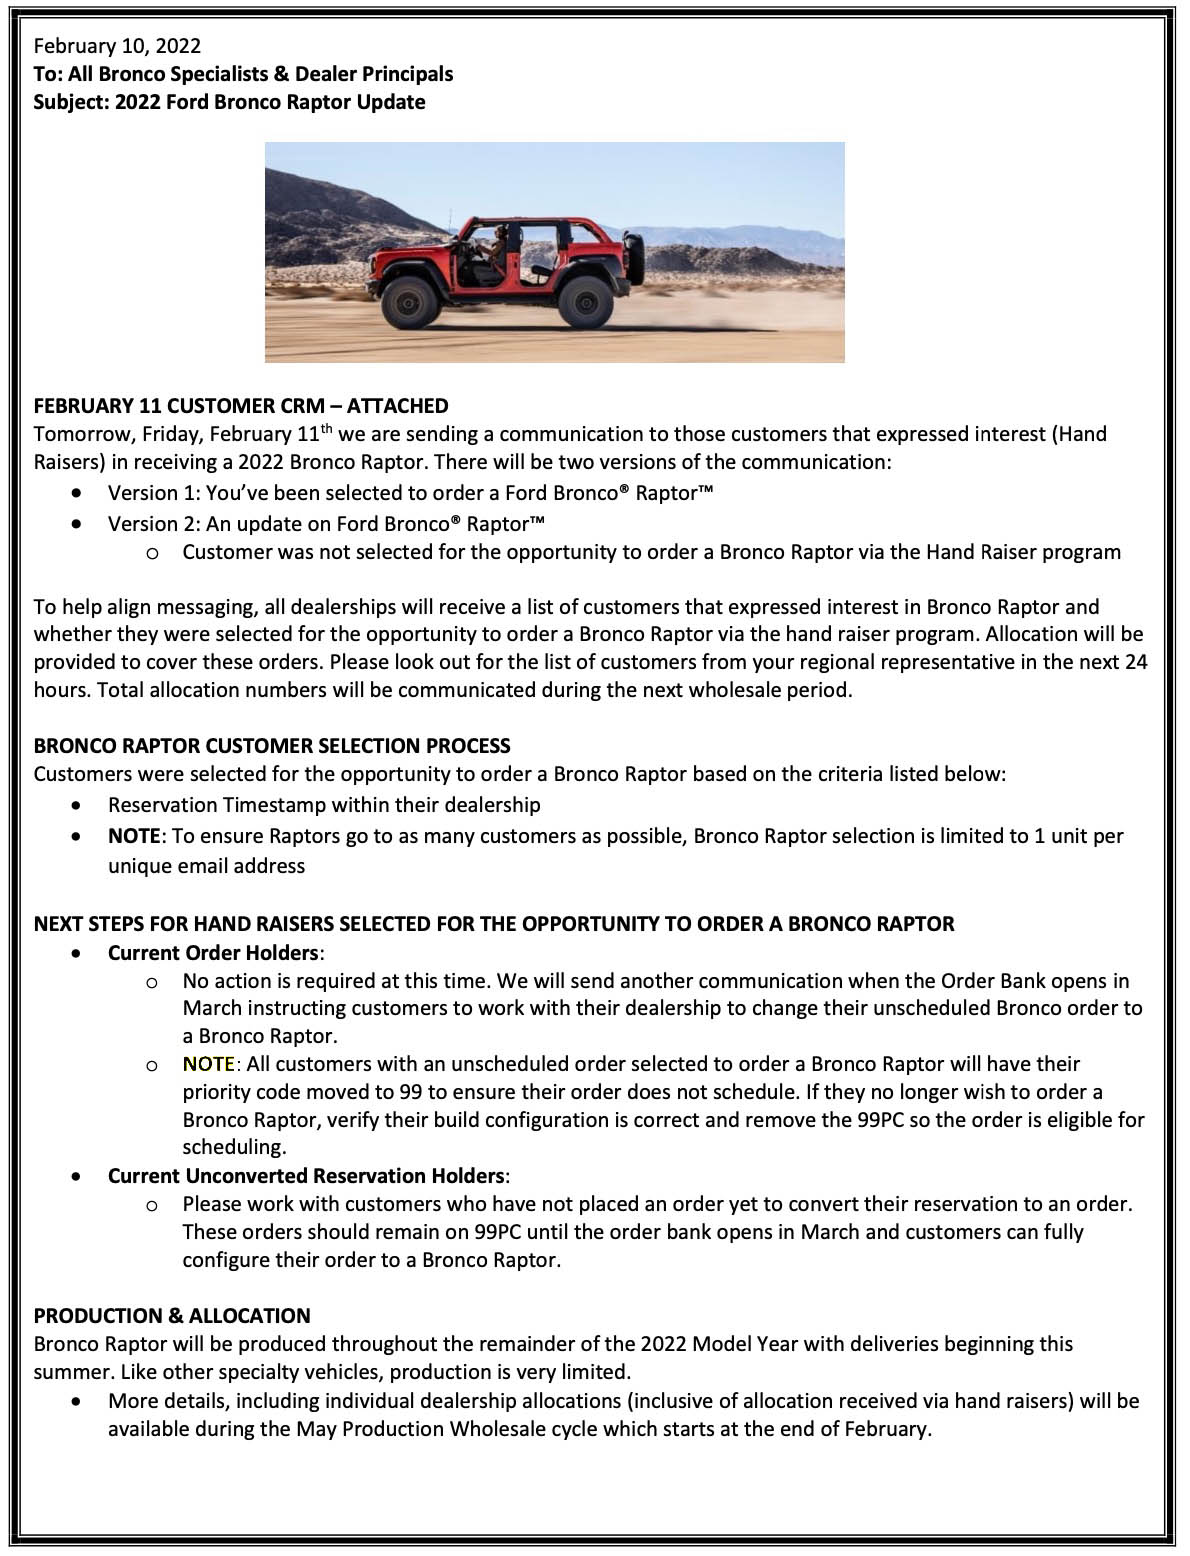 Ford Bulletin  Bronco Raptor Order Invitation Email, Customer Selection Process, Production, A...jpg